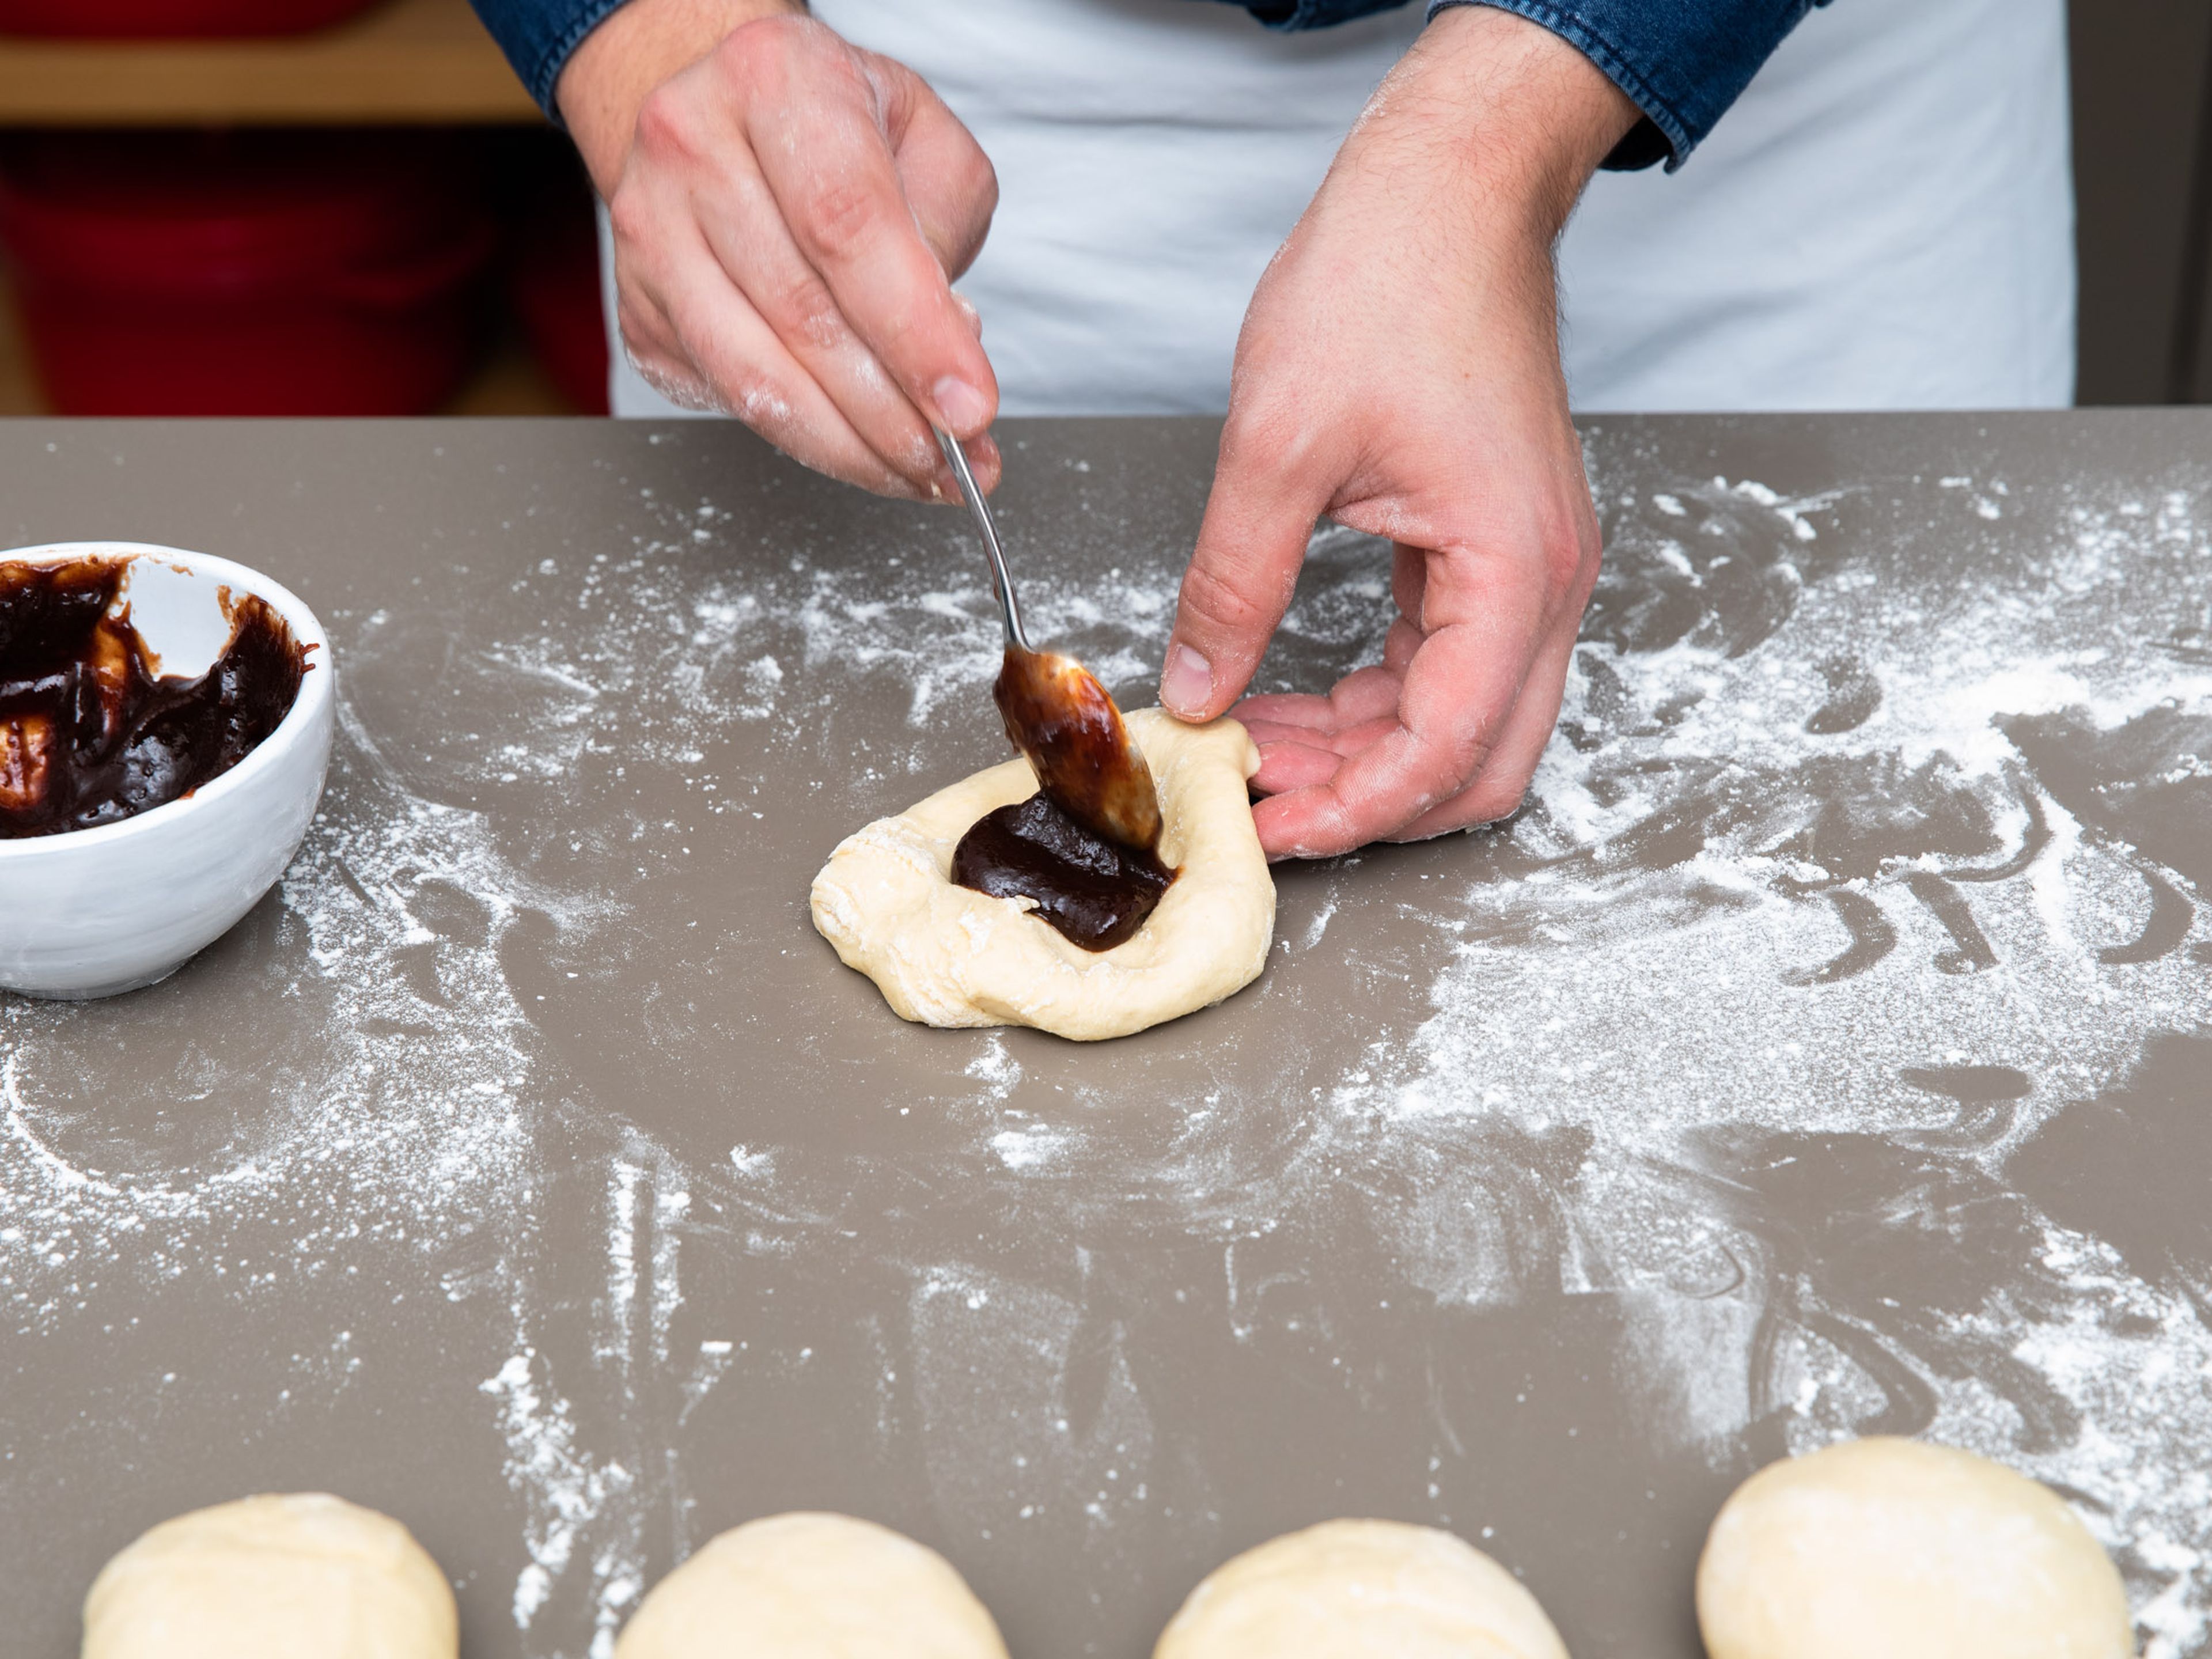 Flour your work surface and divide the dough into 8 equal-sized pieces. Form each dough piece into a disc, add a tablespoon of plum jam into the center of the disc and fold dough gently over the filling, pinching the seam. Form into round dumplings and let rest again for approx. 15 min.